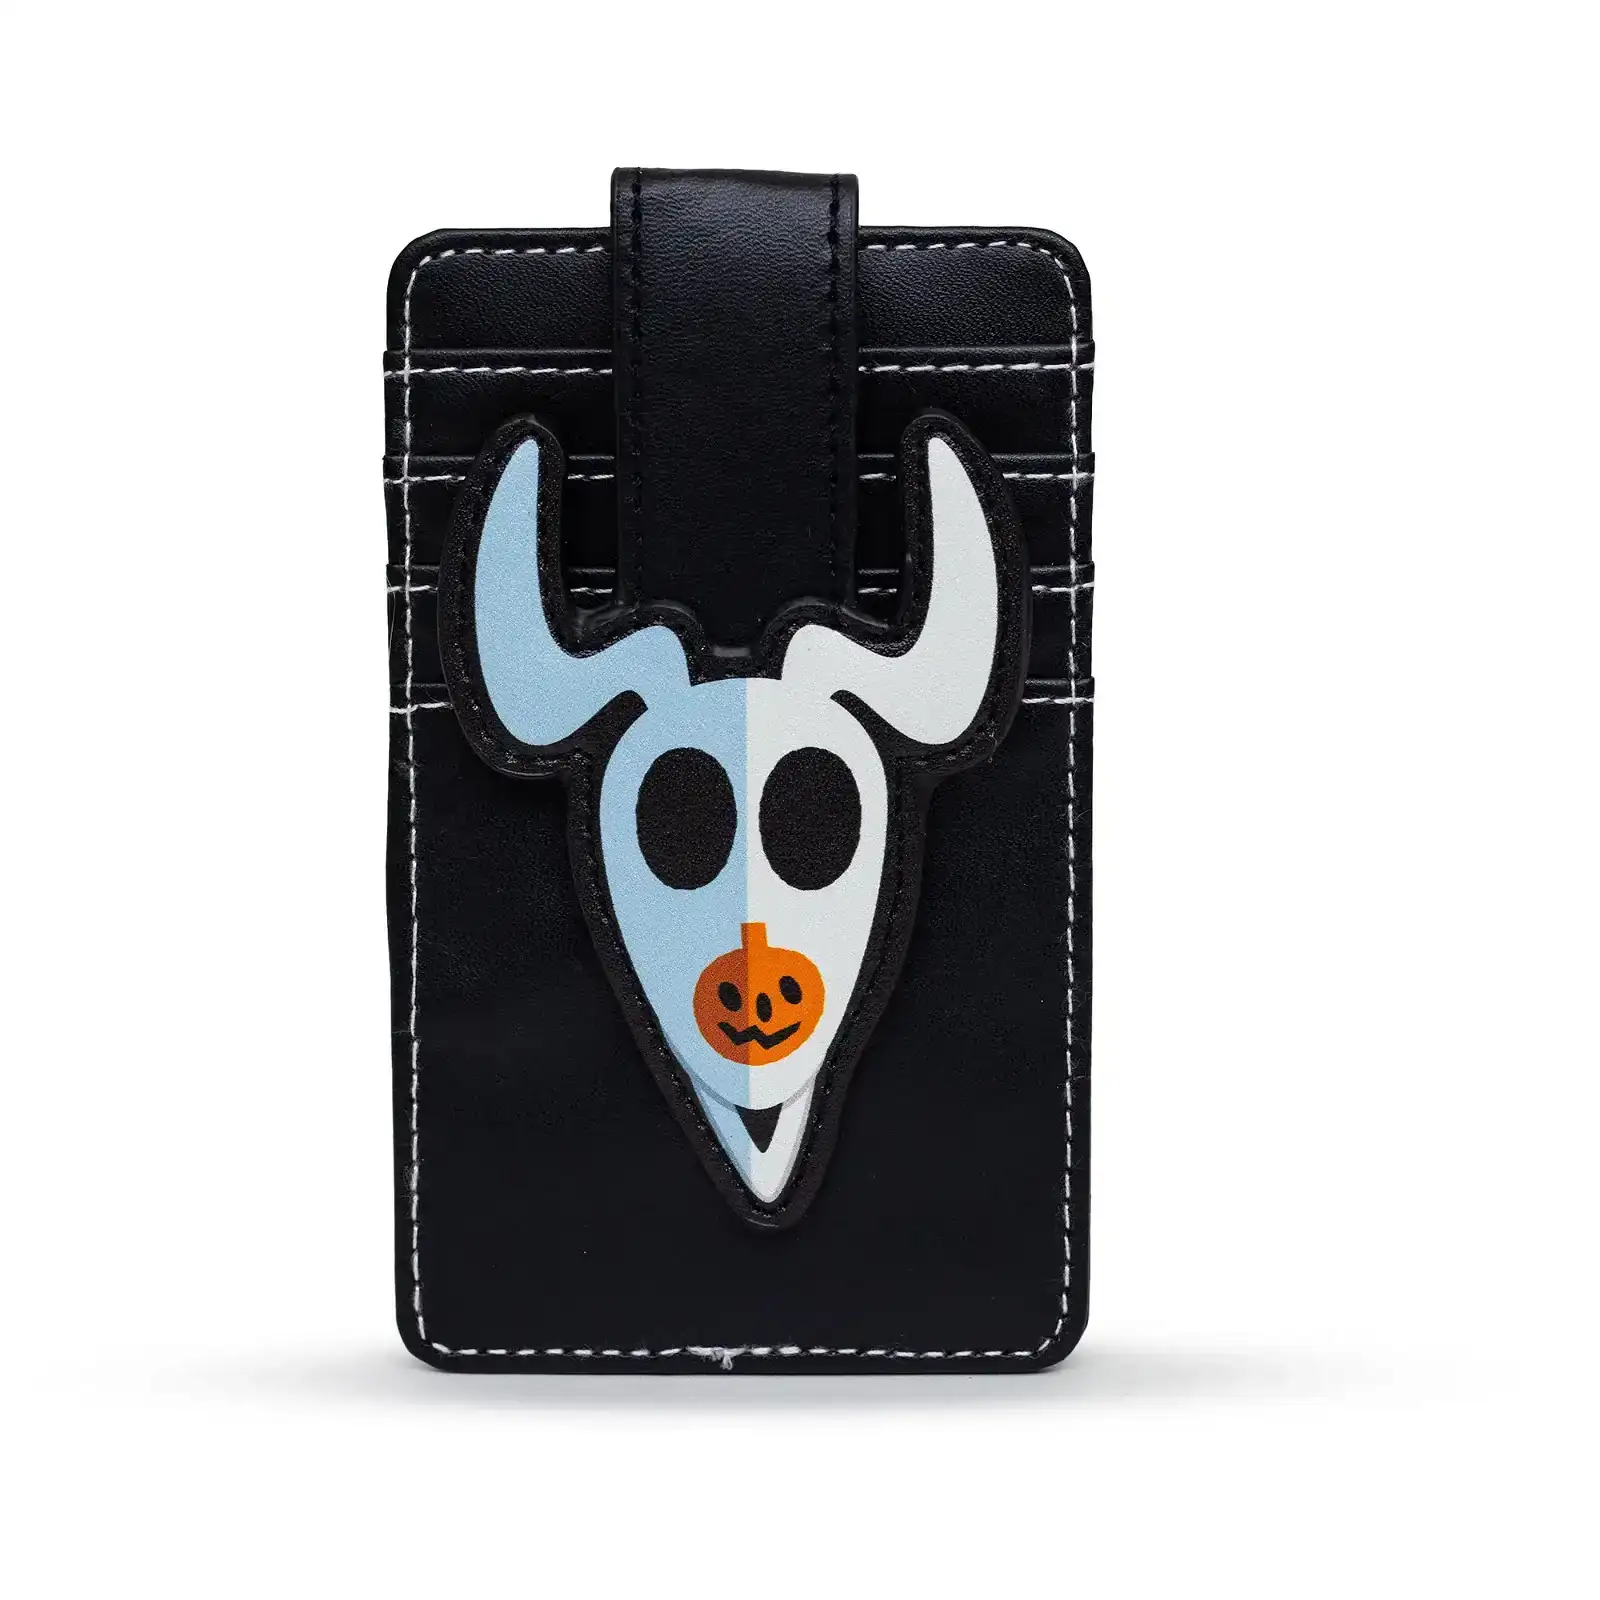 Image of Disney Wallet, Character Wallet ID Card Holder, The Nightmare Before Christmas Zero Face Black, Vegan Leather